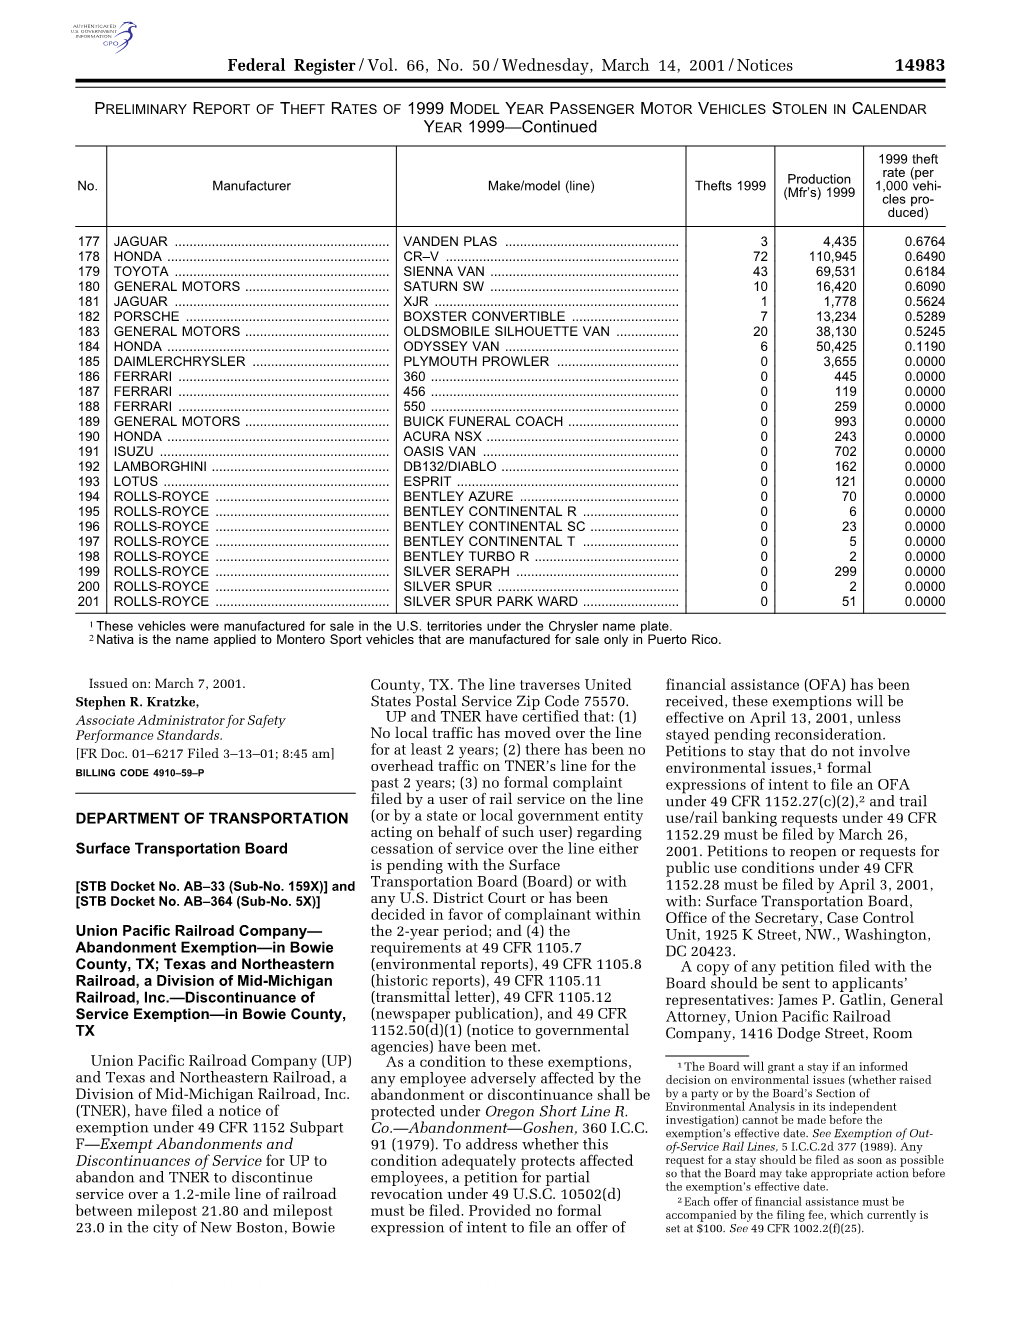 Federal Register/Vol. 66, No. 50/Wednesday, March 14, 2001/Notices YEAR 1999—Continued